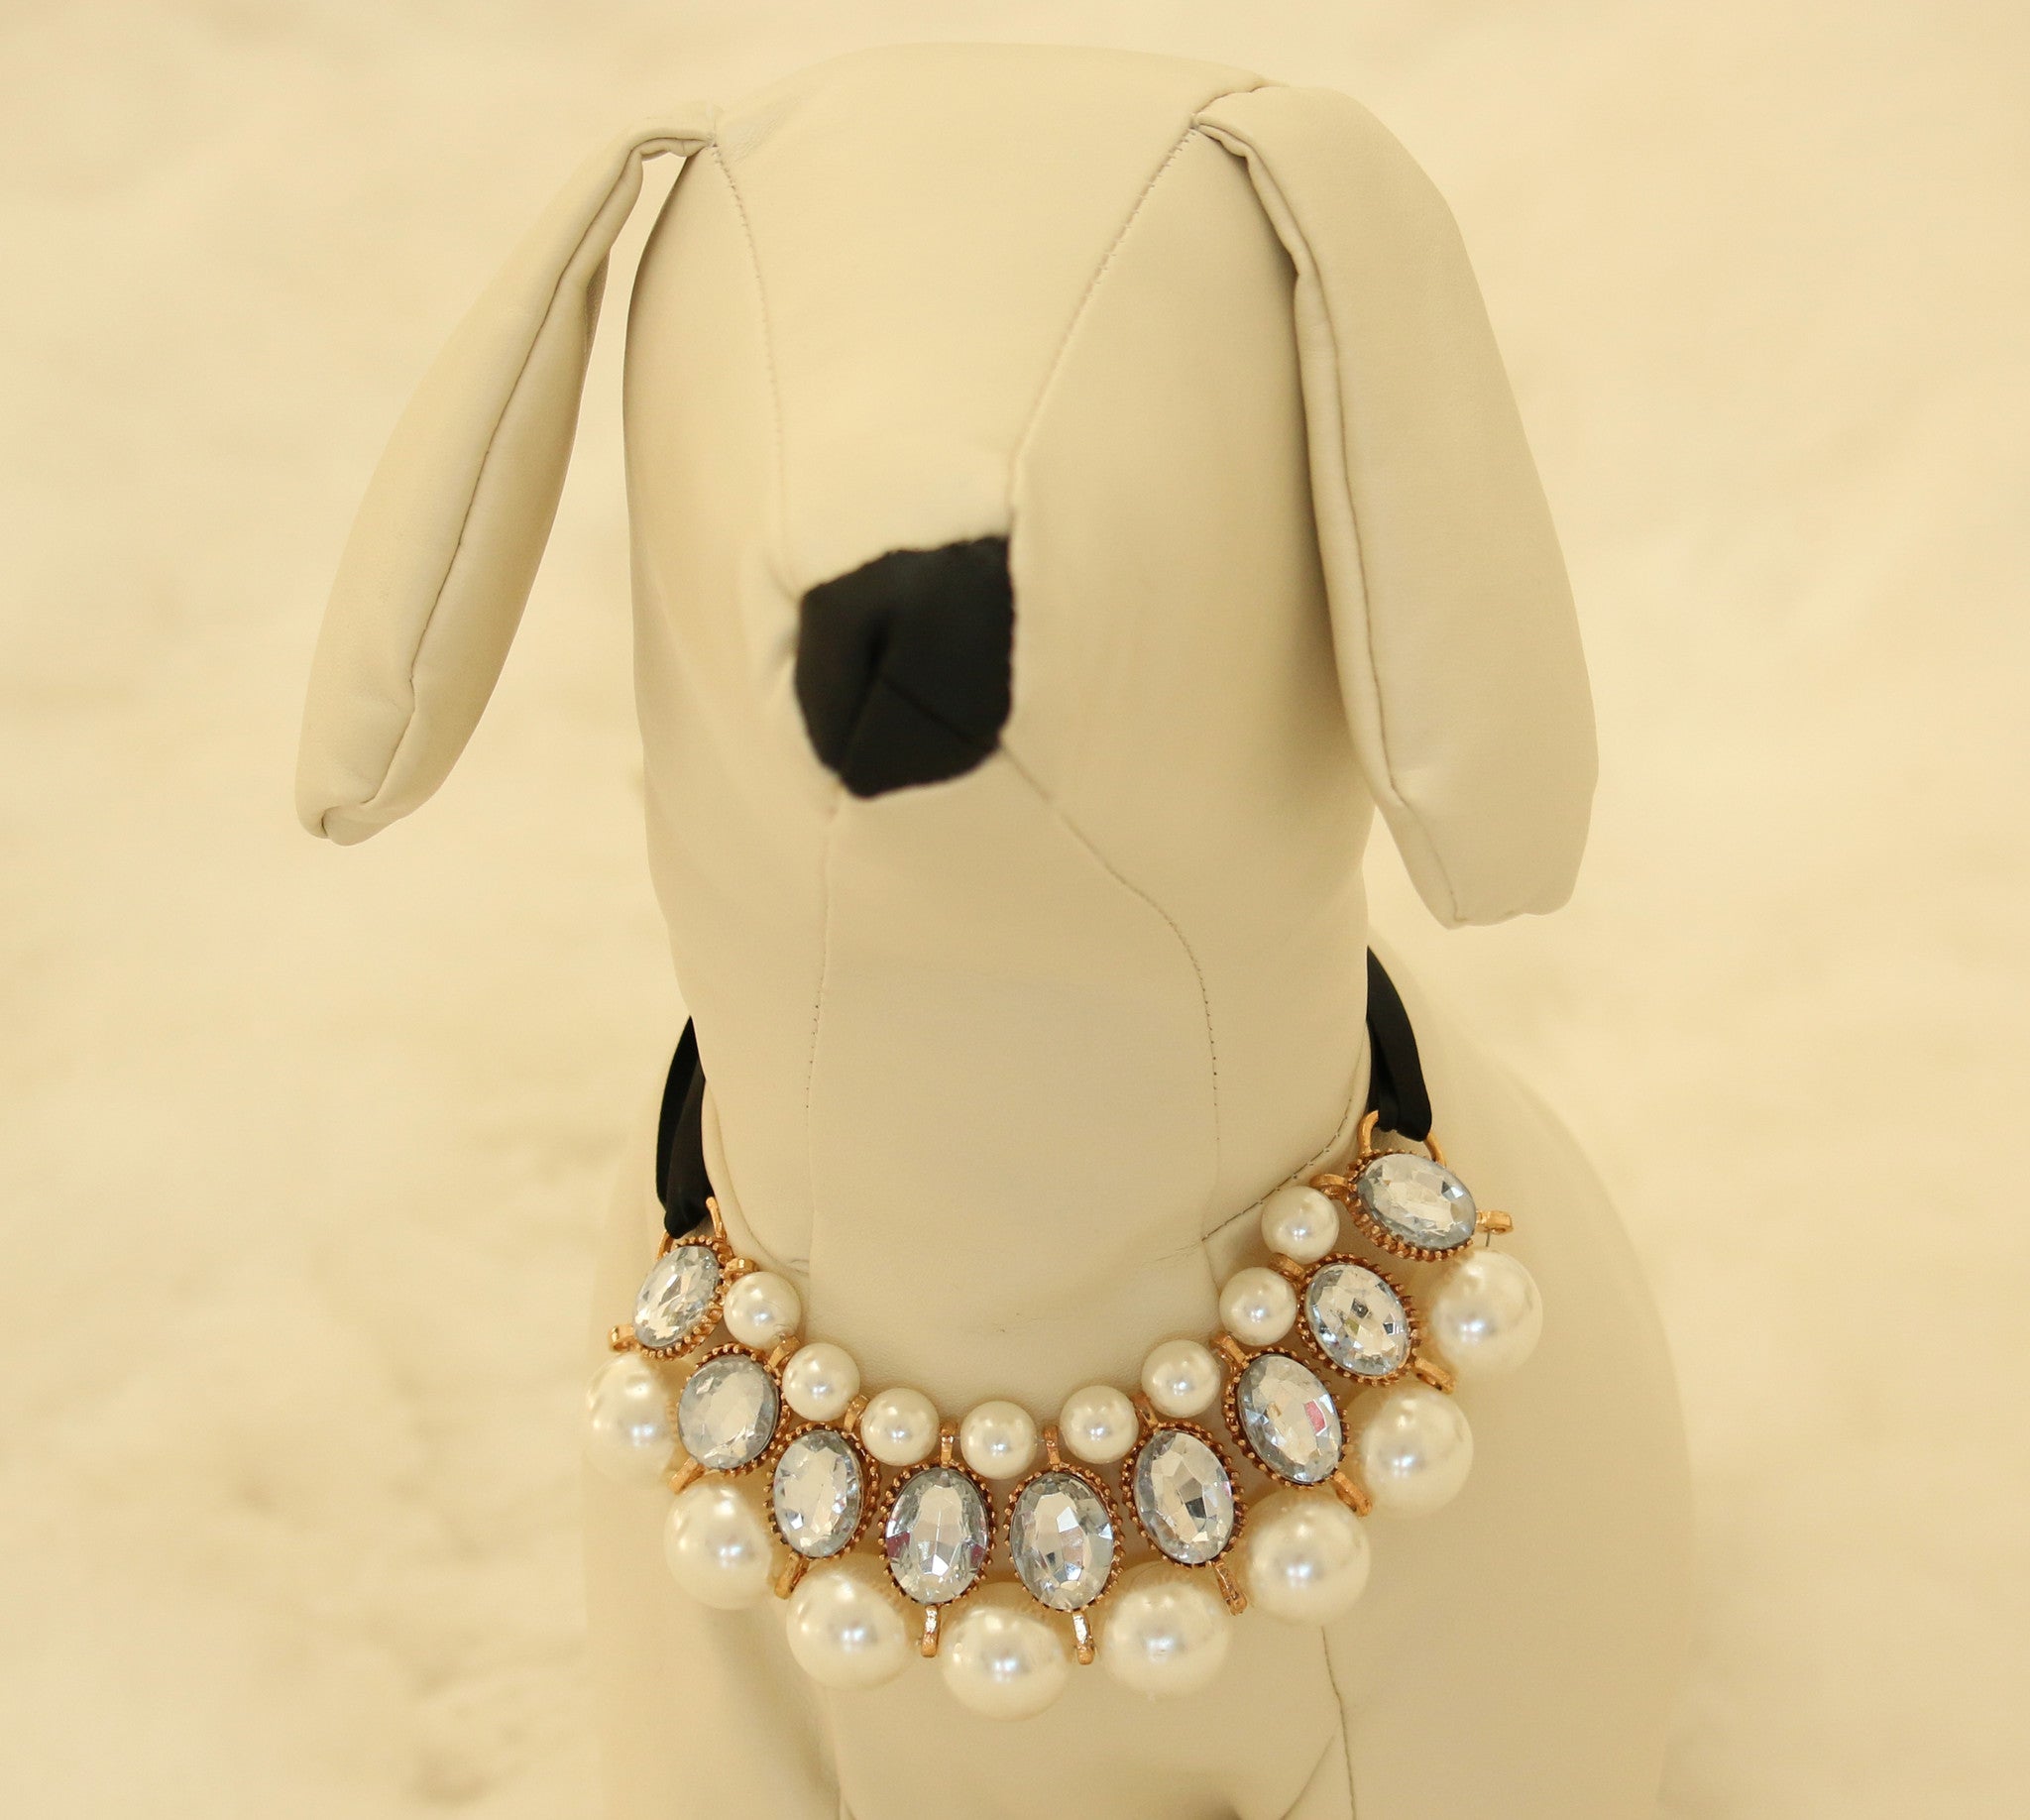 The Candy Paw - Beaded Dog Collar Necklace - Small